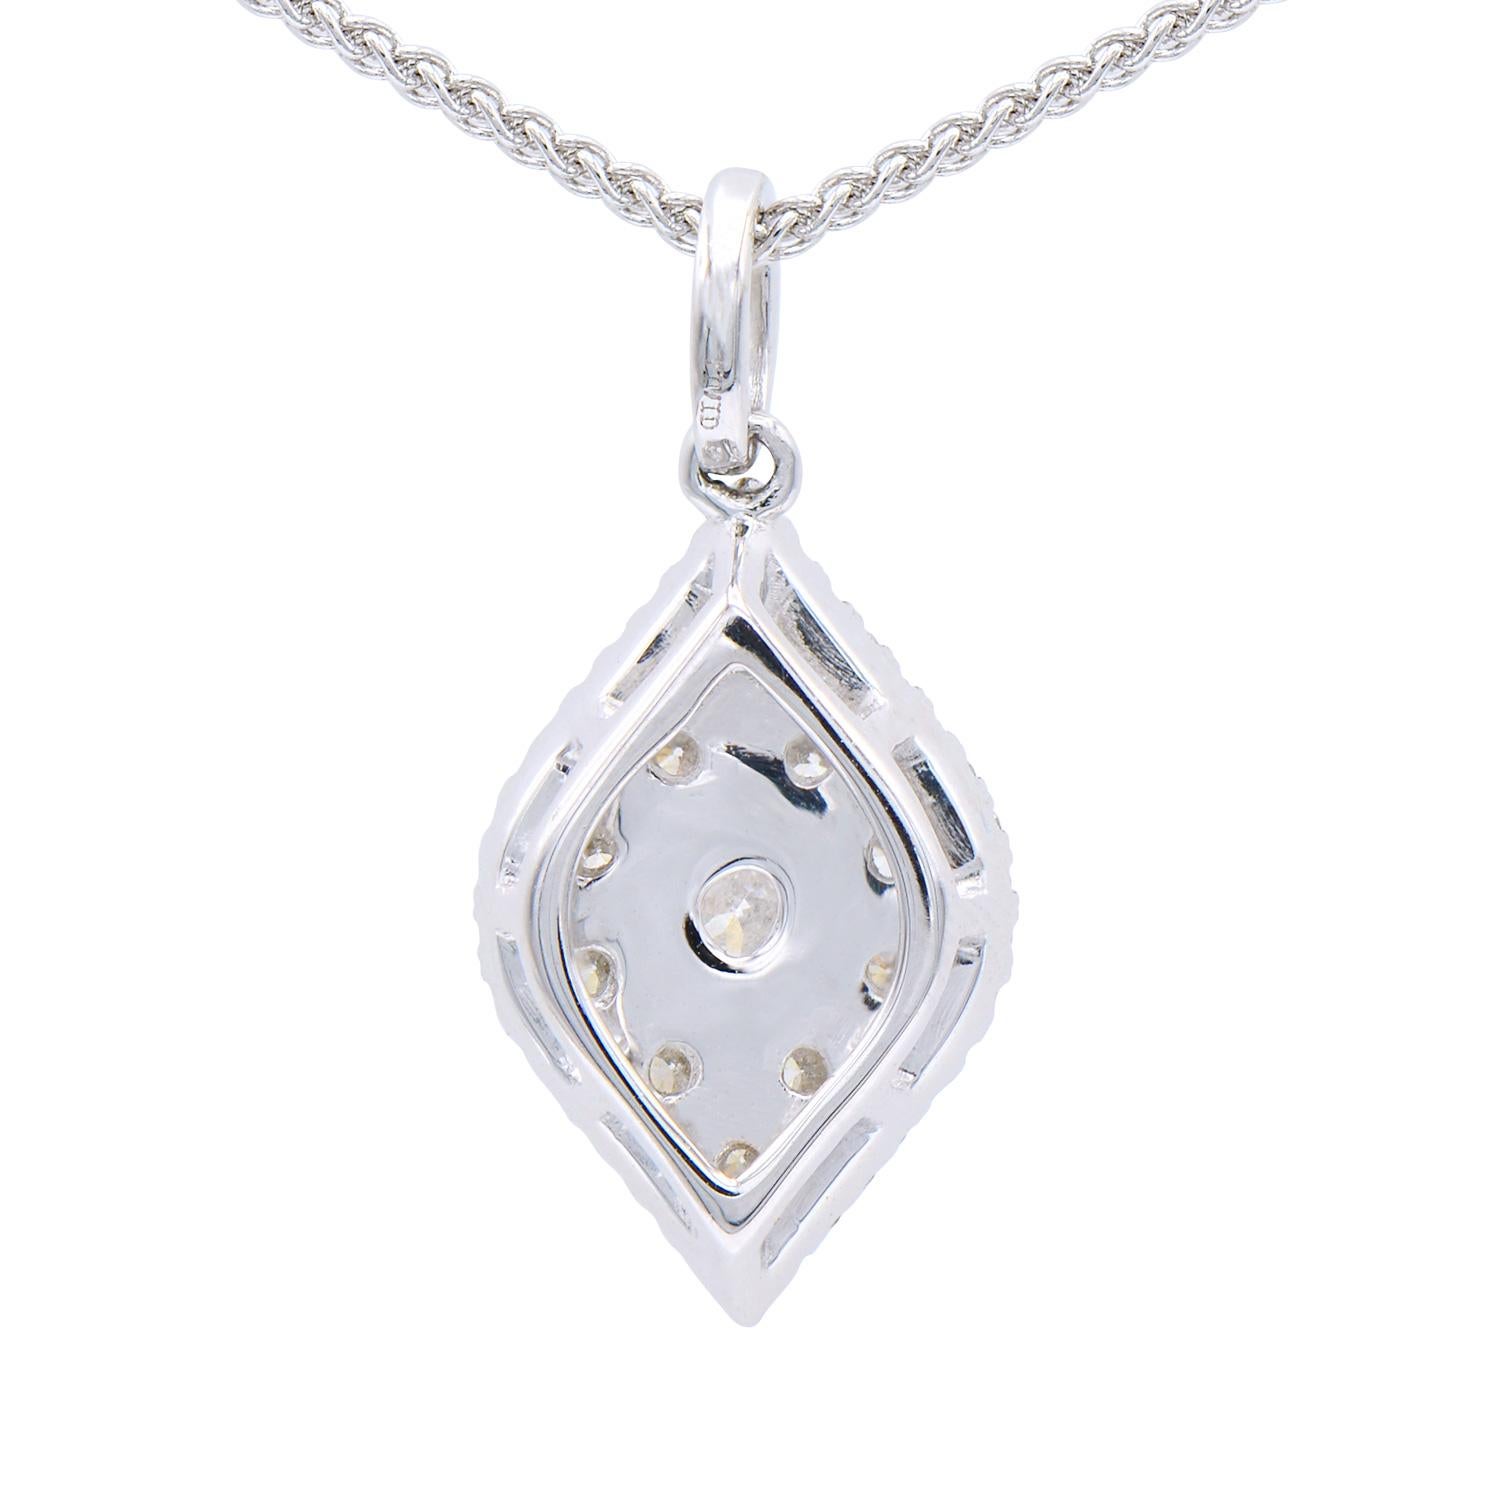 Contemporary 18K White Gold Diamond Pendant with Chain For Sale